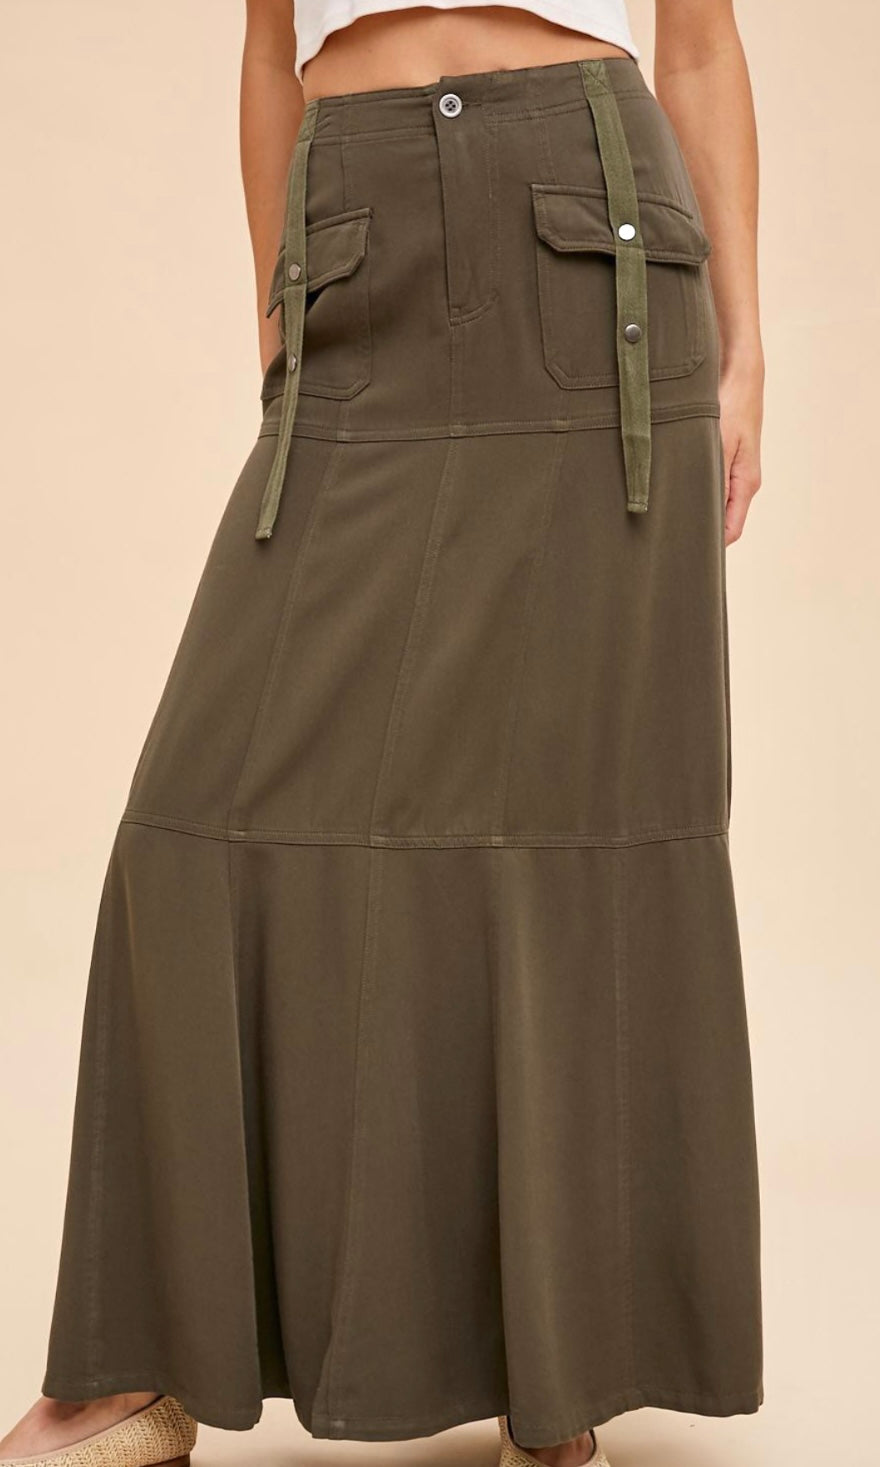 *SALE! Andy - Olive Tencel Utility Cotton Maxi Skirt